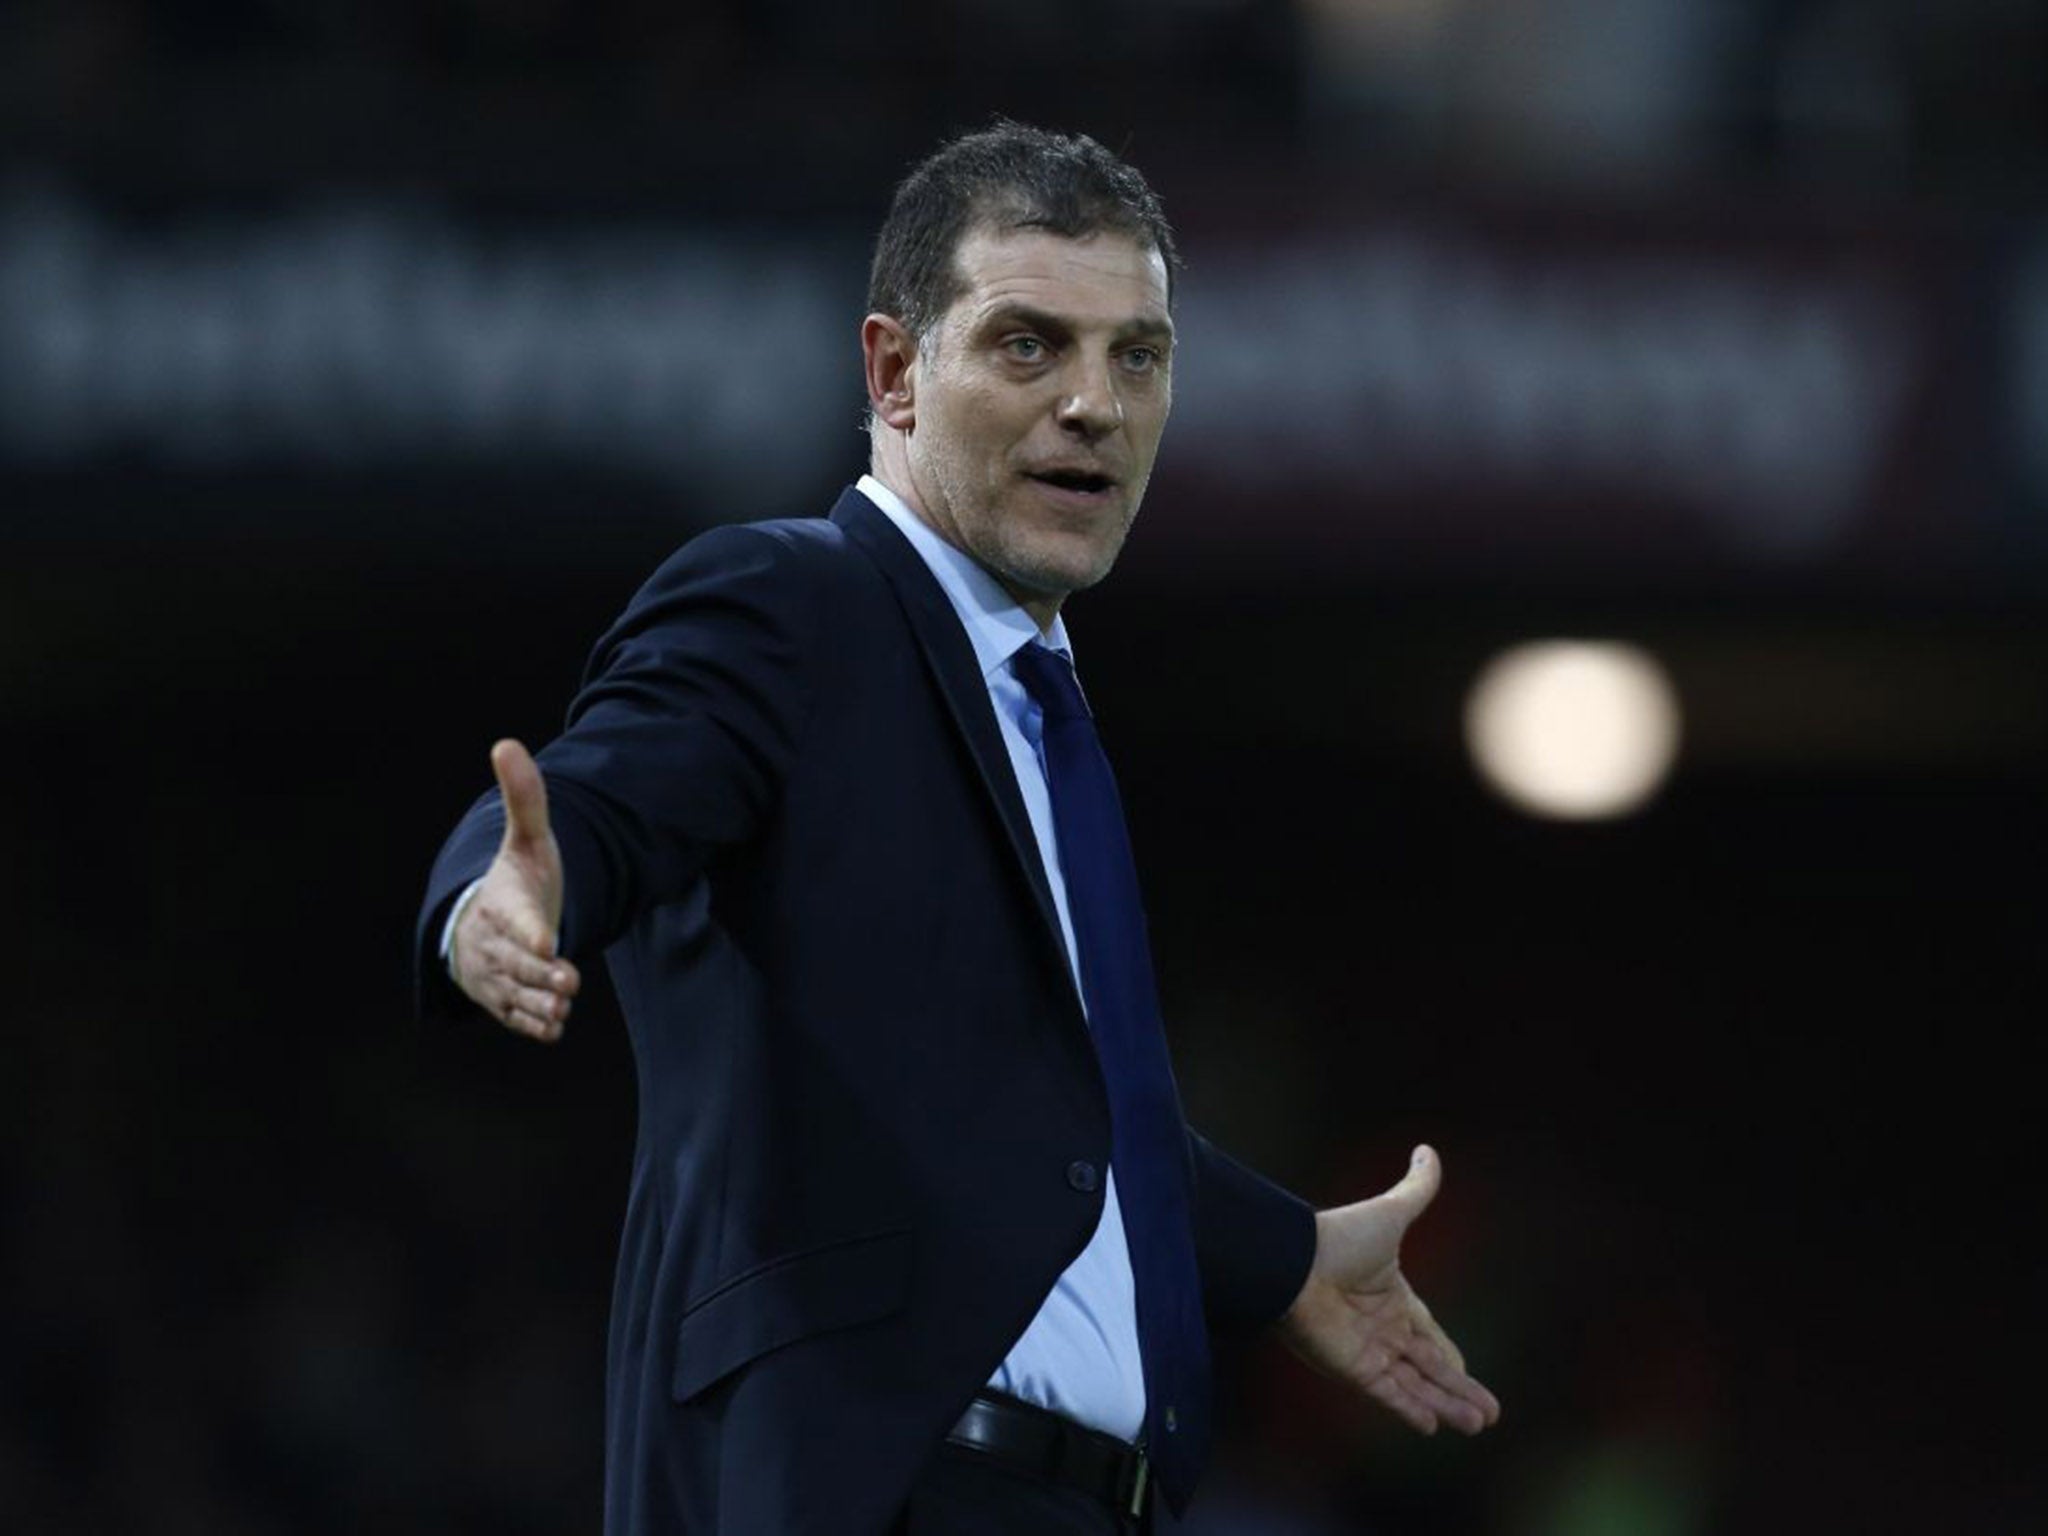 West Ham United's Croatian manager Slaven Bilic reacts after West Ham concede a penalty during the English Premier League football match between West Ham United and Manchester City at The Boleyn Ground in Upton Park.